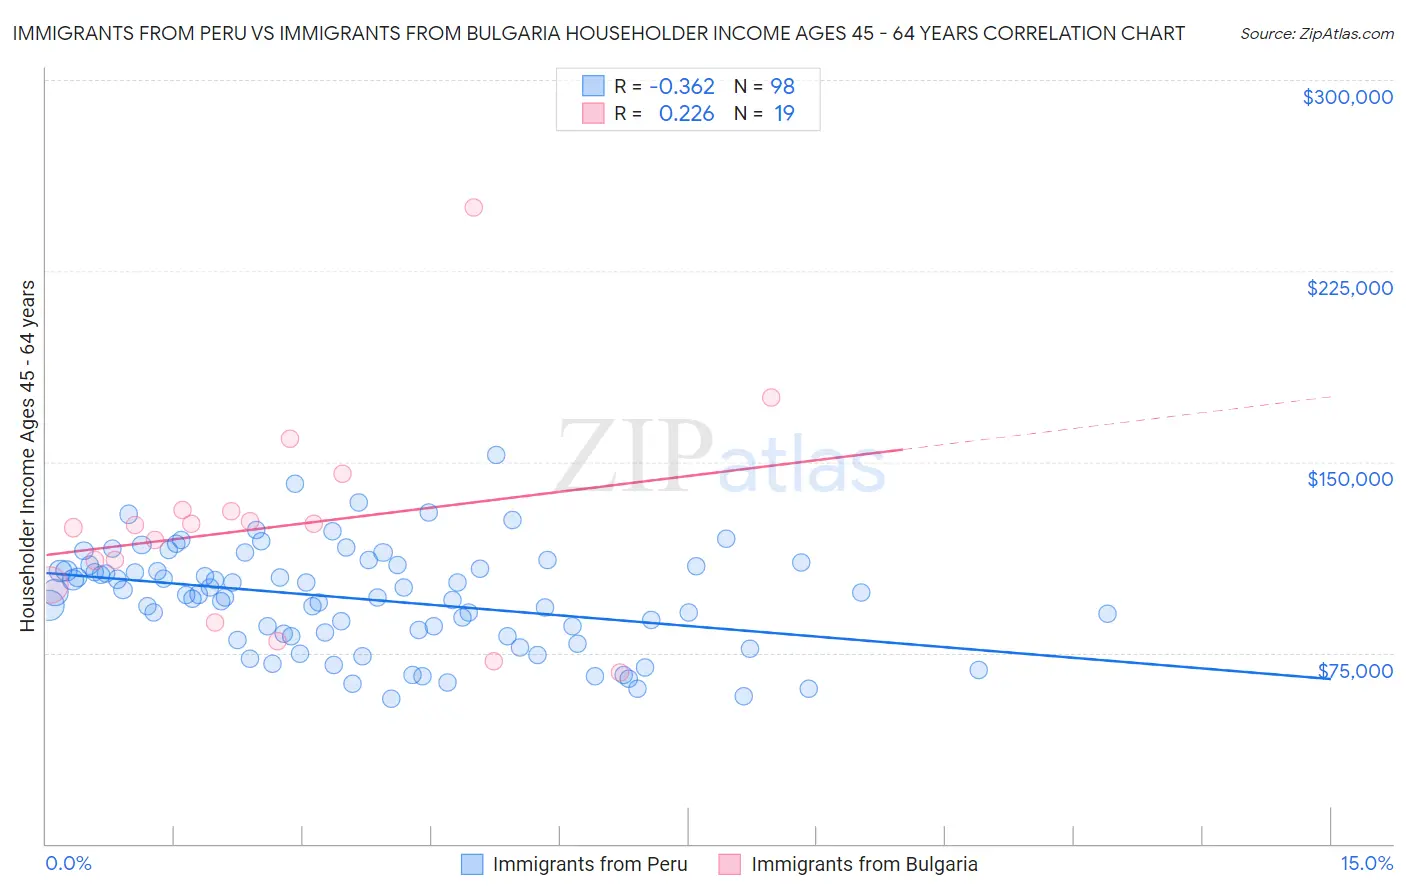 Immigrants from Peru vs Immigrants from Bulgaria Householder Income Ages 45 - 64 years